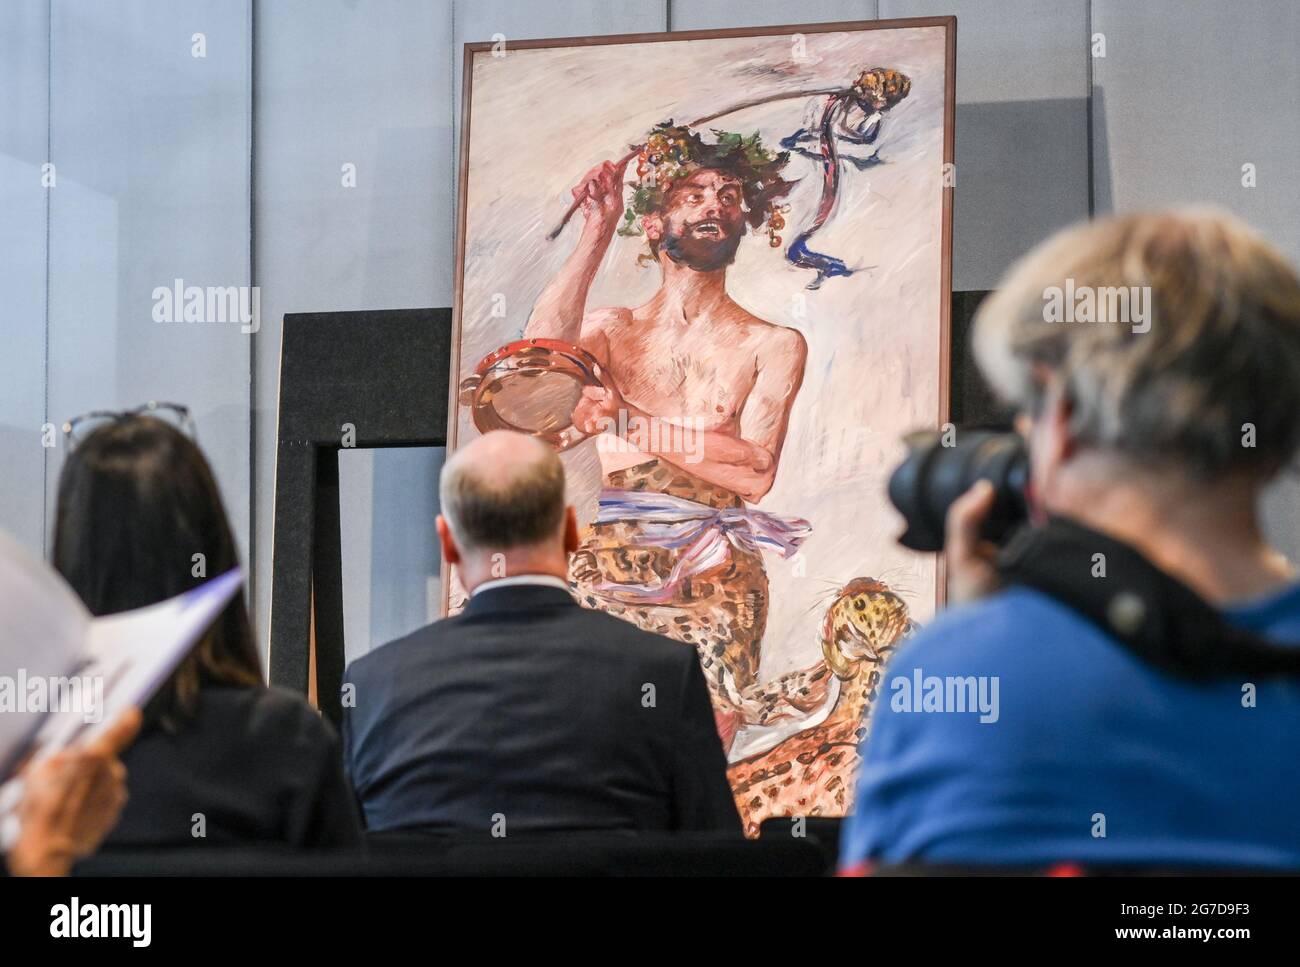 Berlin, Germany. 13th July, 2021. The painting "Bacchant" by Lovis Corinth, newly acquired for the exhibition, will be presented at a press event at the Berlinische Galerie. Credit: Jens Kalaene/dpa-Zentralbild/dpa - ATTENTION: Only for editorial use and only with full mention of the above credit/dpa/Alamy Live News Stock Photo